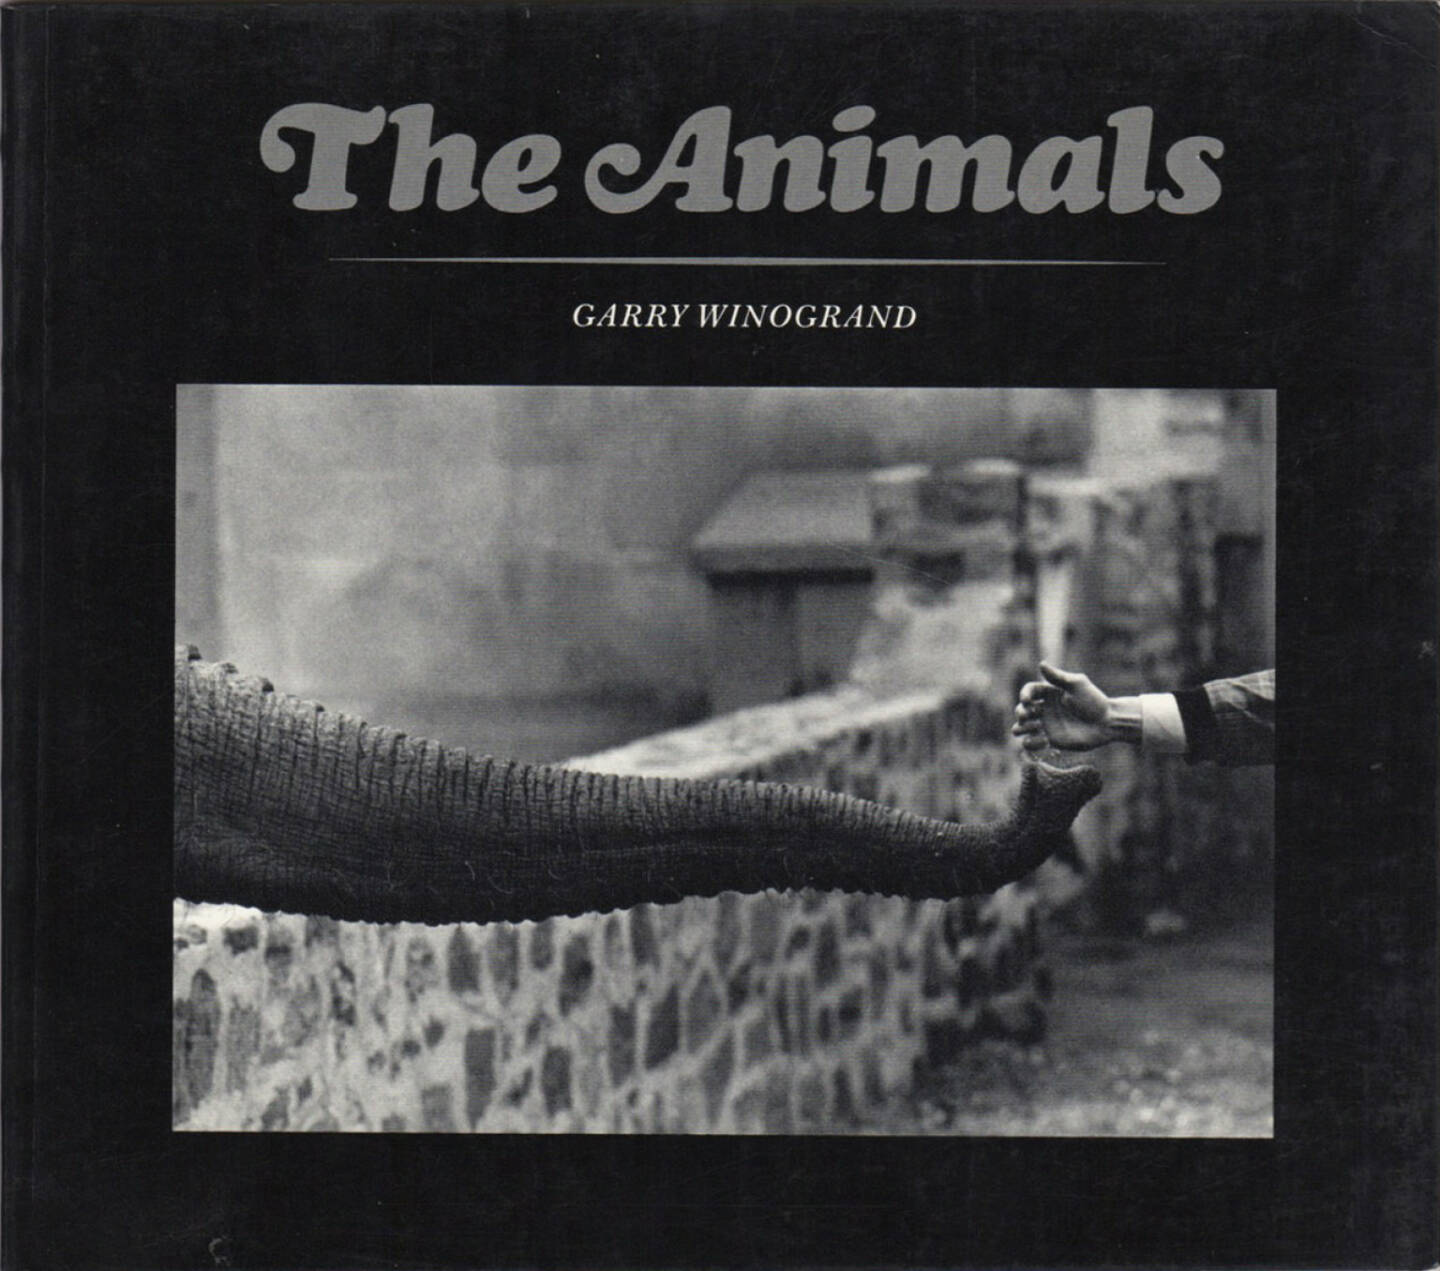 Garry Winogrand - The Animals (Softcover, first edition), The Museum of Modern Art 1969, Cover - http://josefchladek.com/book/garry_winogrand_-_the_animals_softcover_first_edition